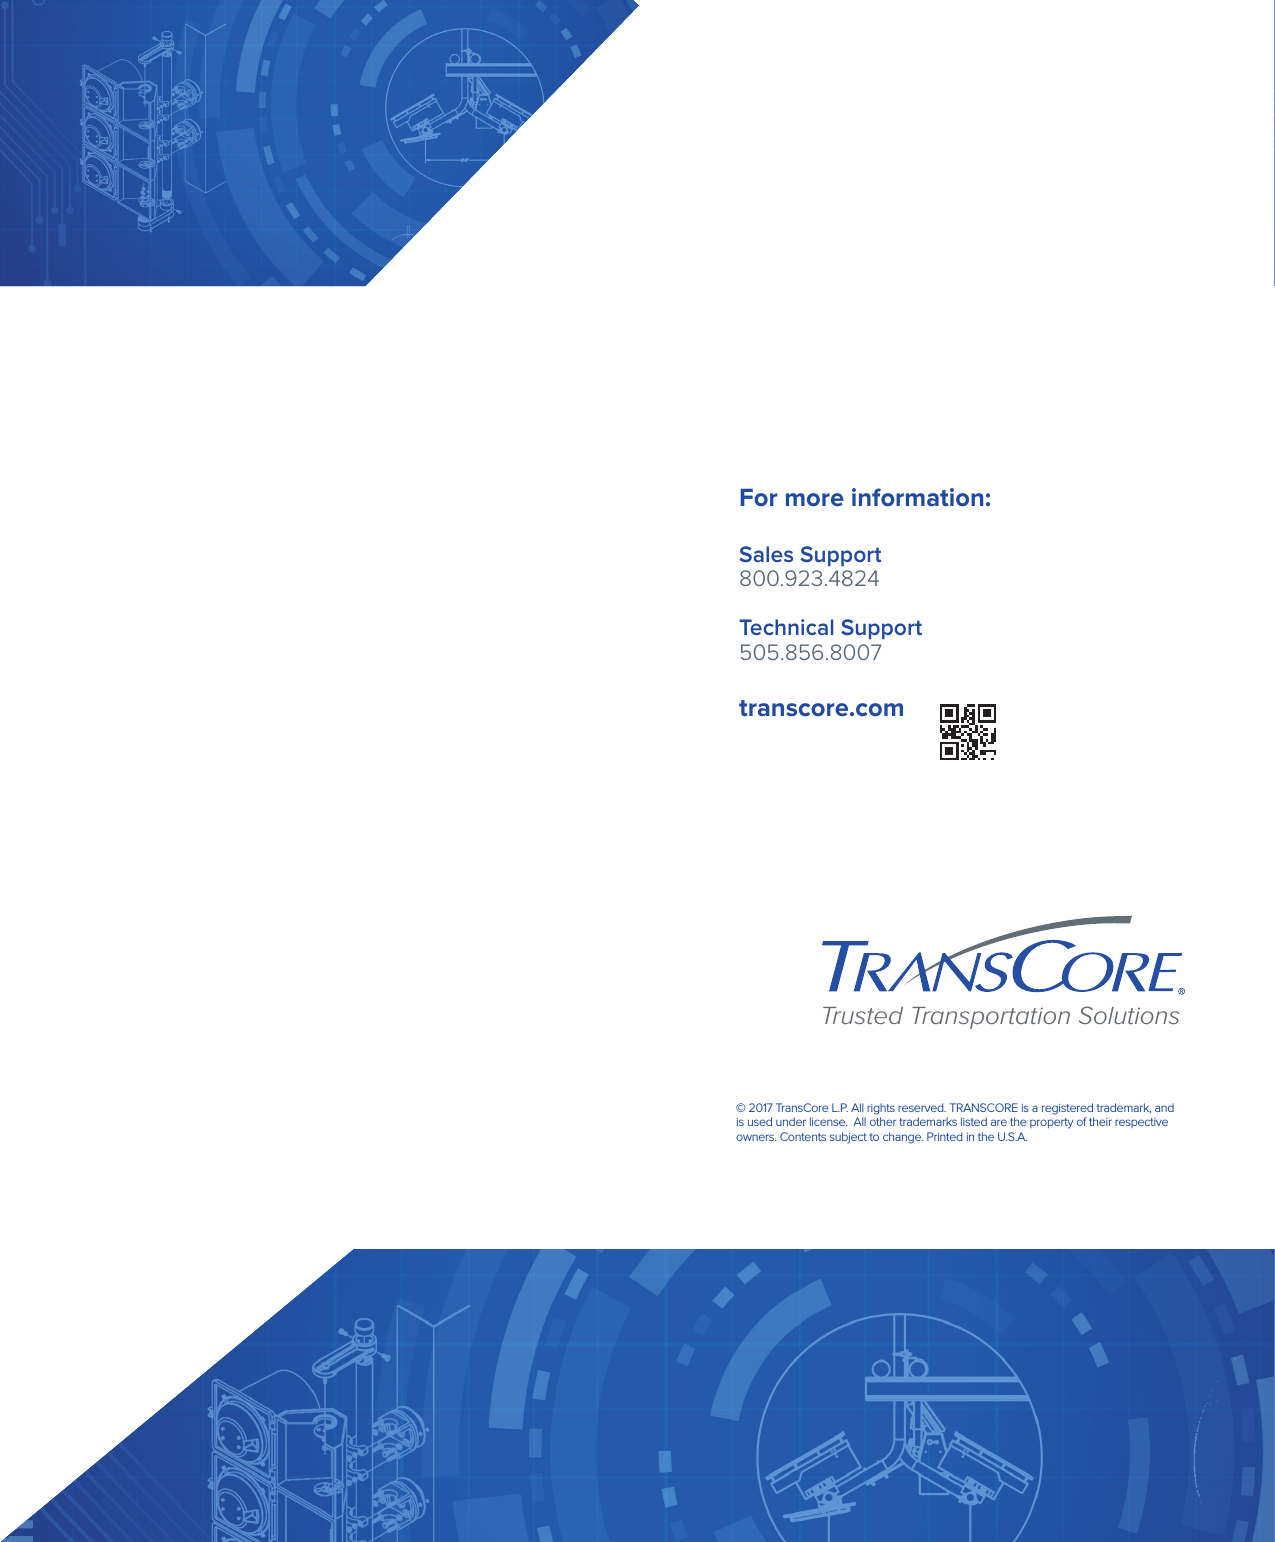 For more information: Sales Support 800.923.4824 Technical Support 505.856.8007transcore.com  Trusted Transportation Solutions© 2017 TransCore L.P. All rights reserved. TRANSCORE is a registered trademark, and is used under license.  All other trademarks listed are the property of their respective owners. Contents subject to change. Printed in the U.S.A.